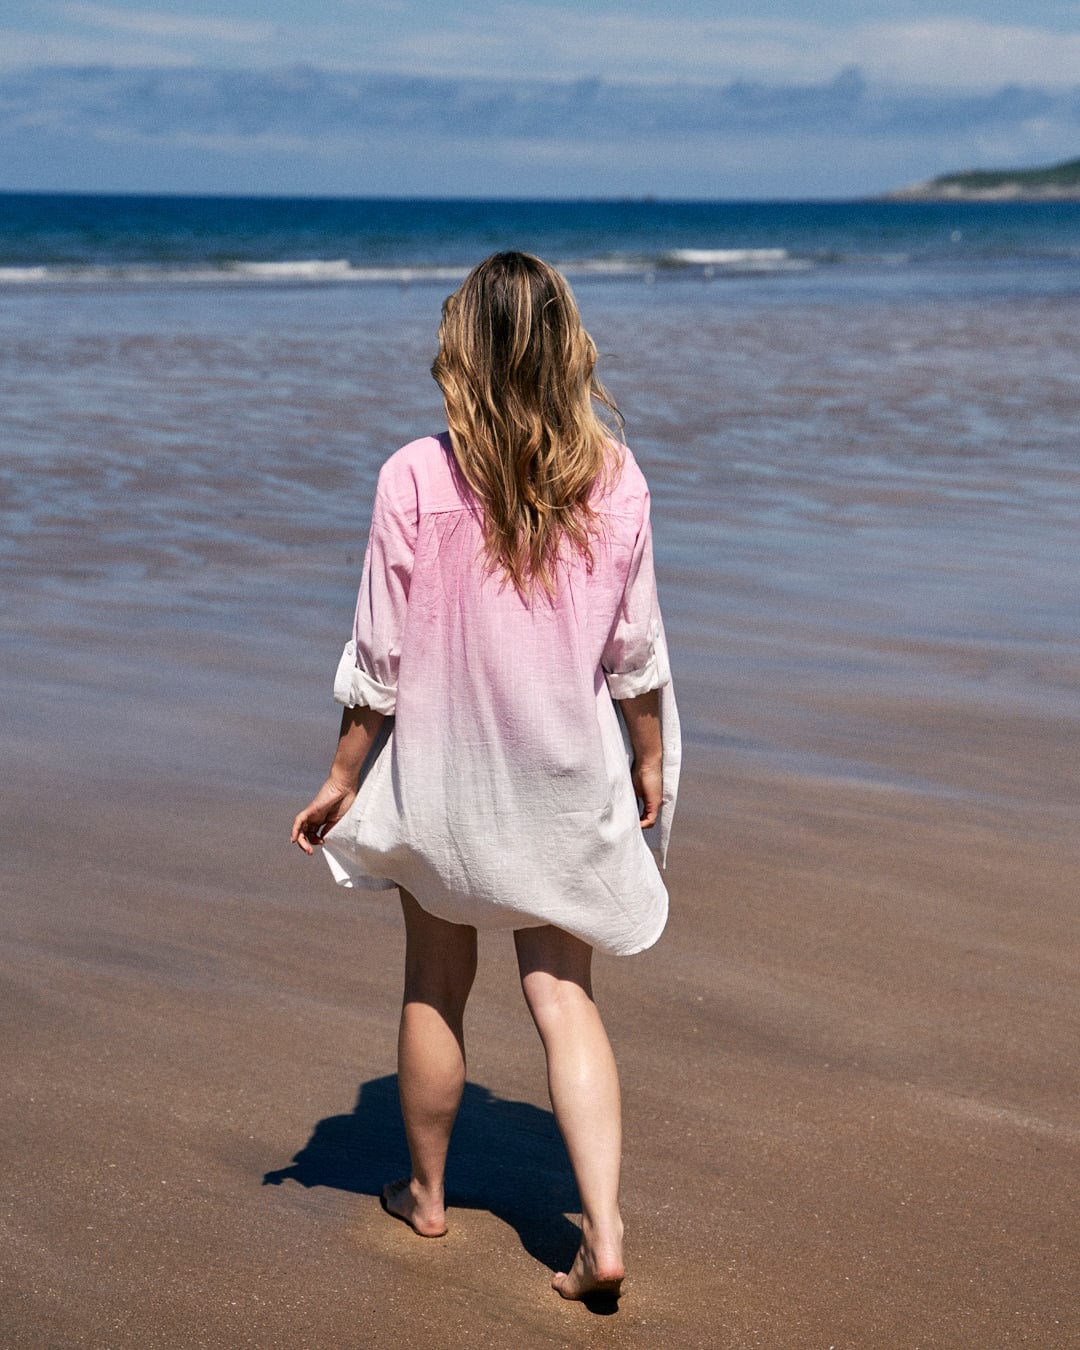 A person with long hair wearing the Saltrock Karthi - Womens Long Sleeve Shirt - Pink/White made of lightweight cotton material walks barefoot on a sandy beach towards the ocean.